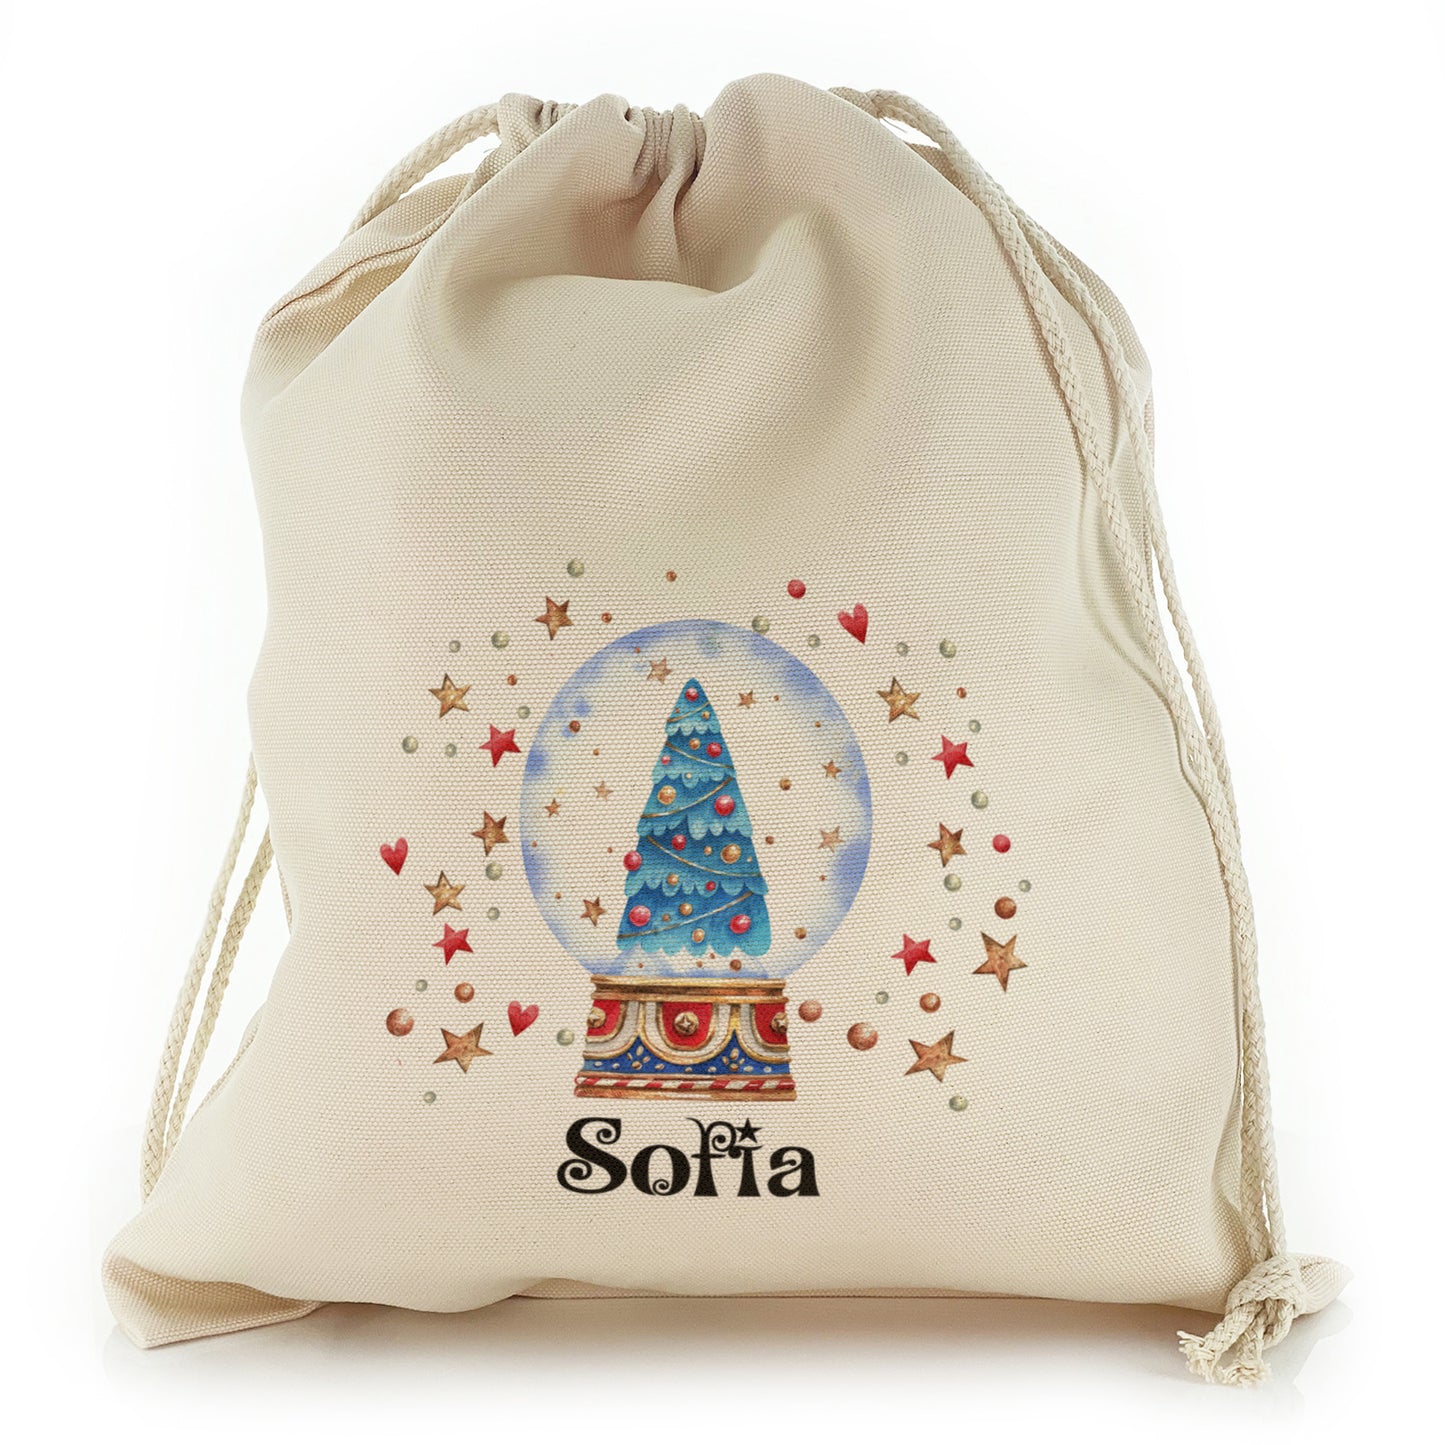 Personalised Canvas Sack with Christmas Text and Blue Xmas Tree Snow Globe